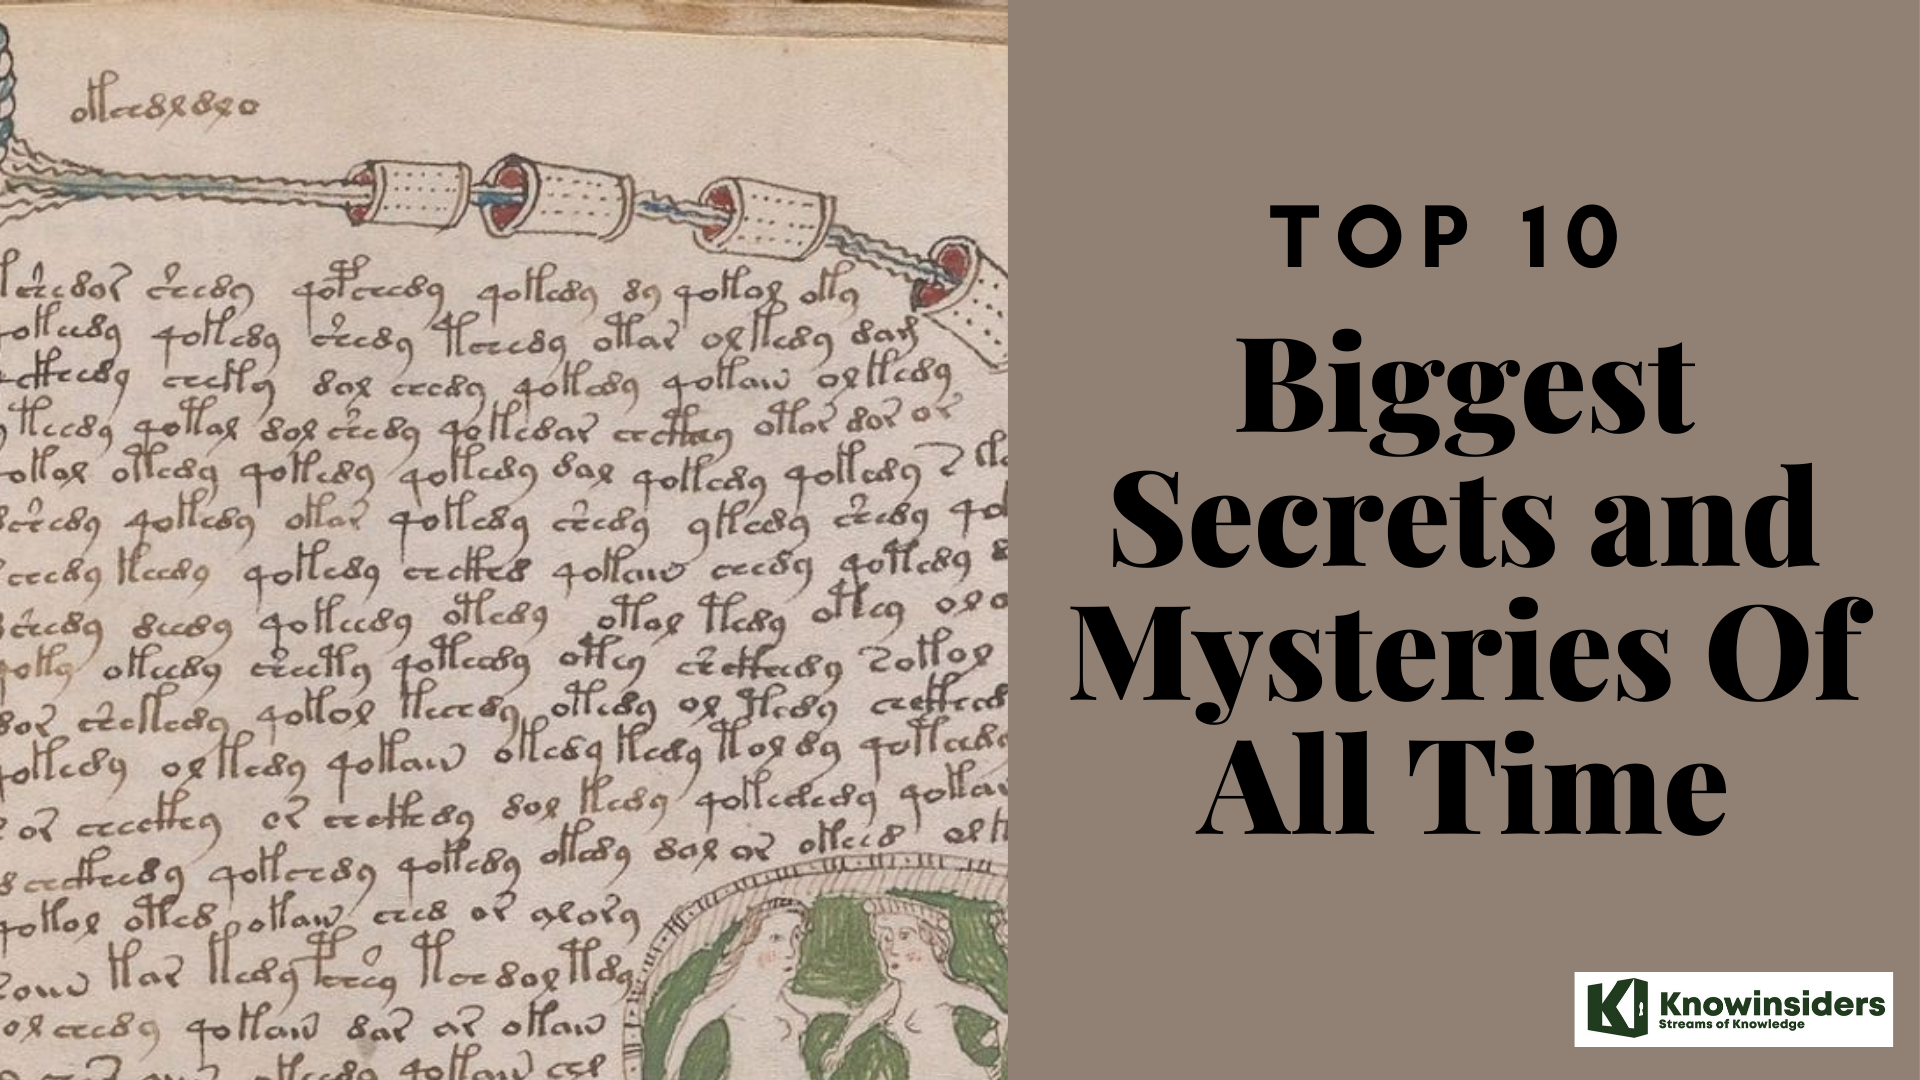 Top 10 biggest secrets and mysteries of all time 